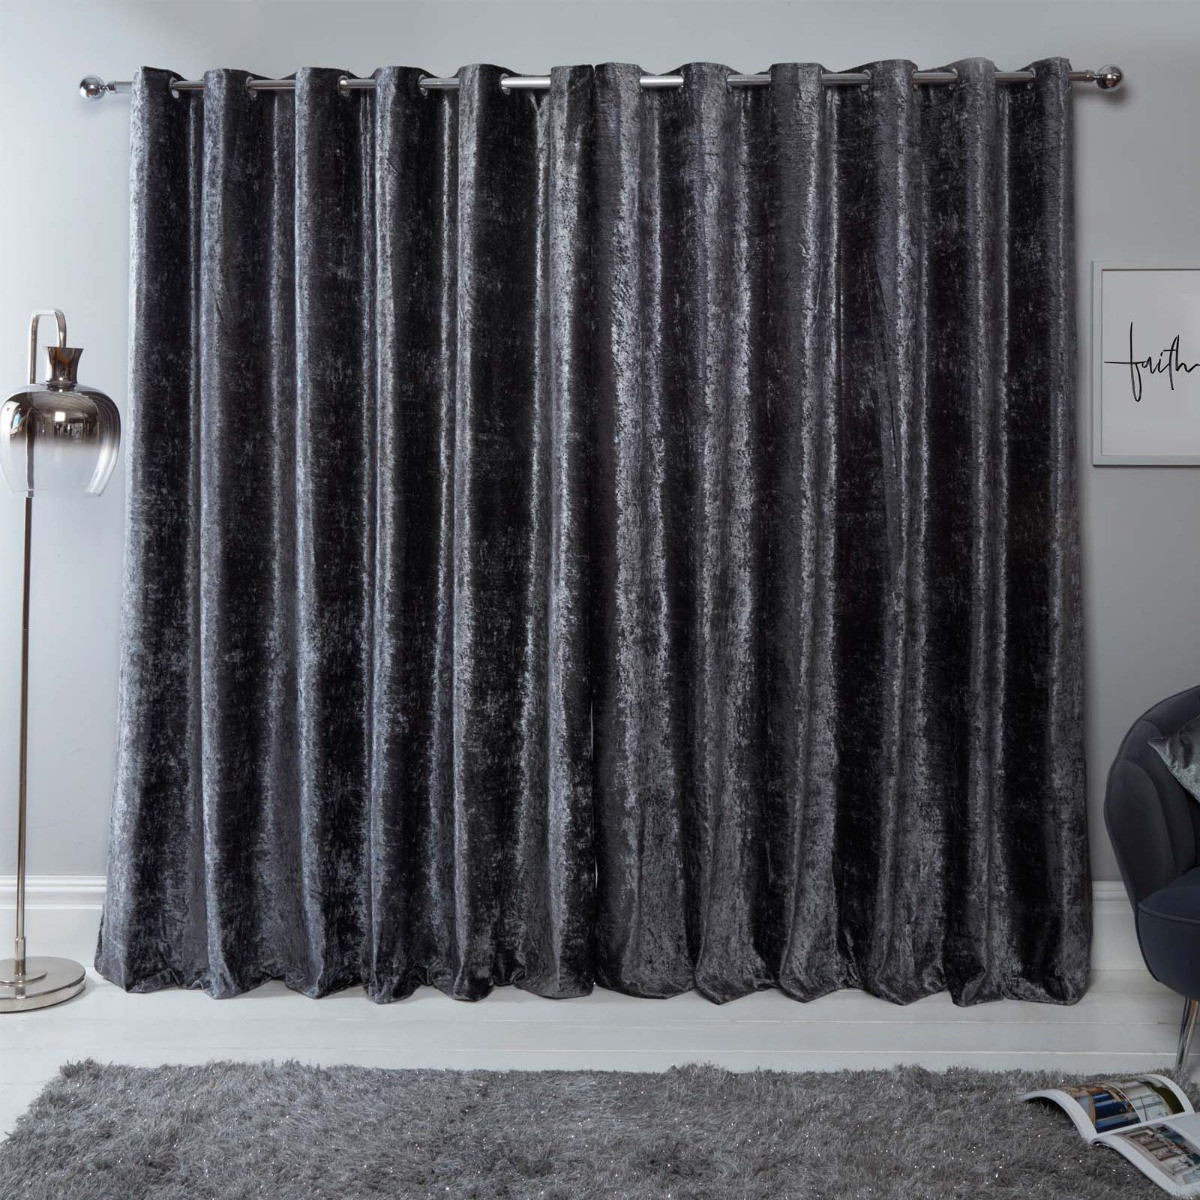 Sienna Home Crushed Velvet Eyelet Curtains - Charcoal Grey 90" x 72">